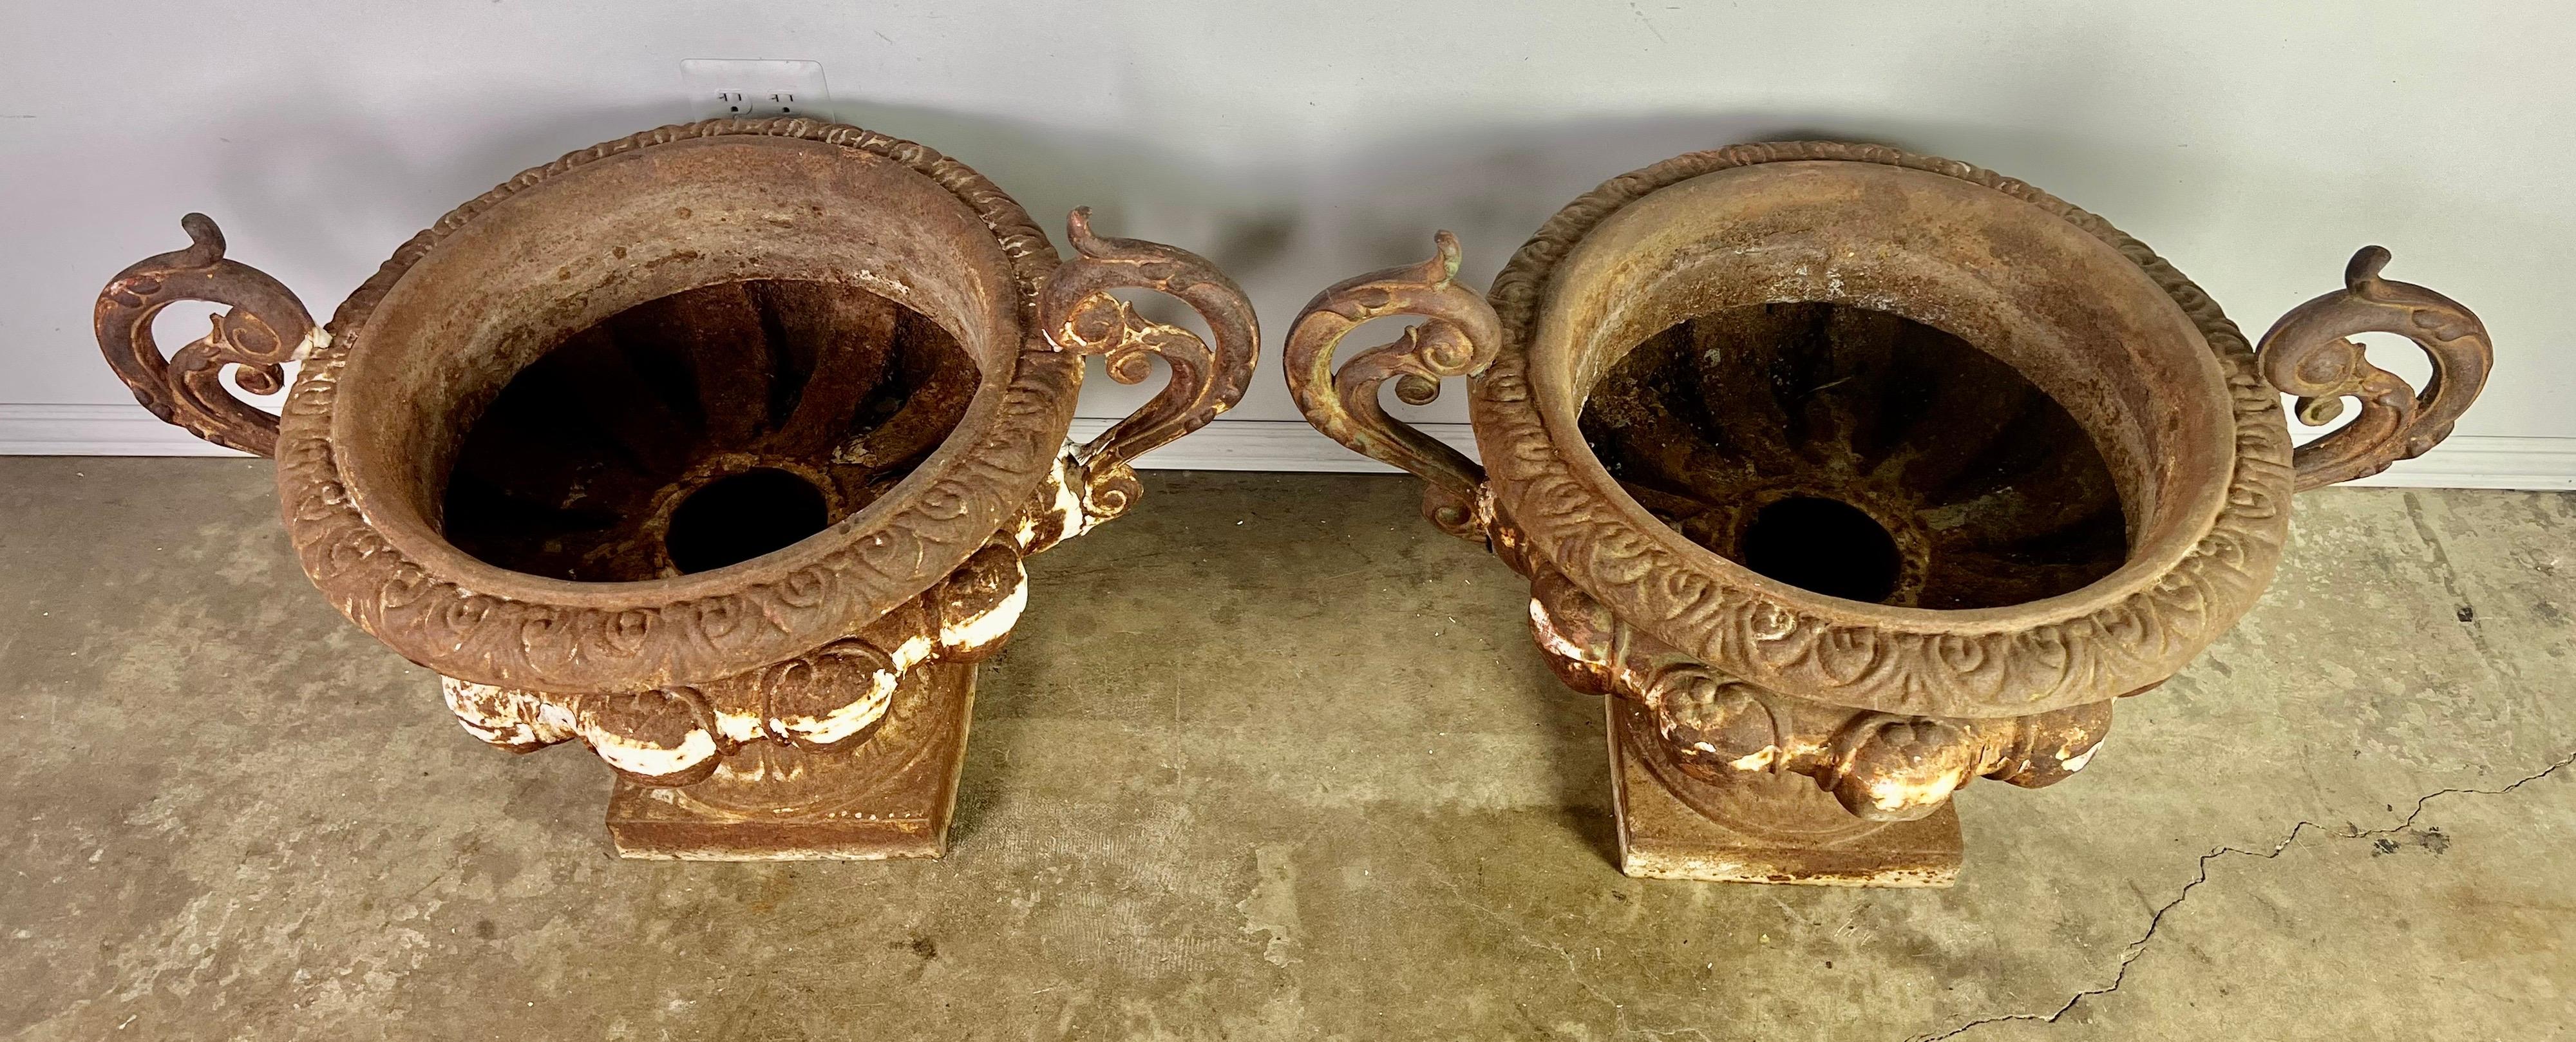 Pair of 19th century French cast iron planters with years of wear to their beautiful patina. Great overall condition with drain holes.